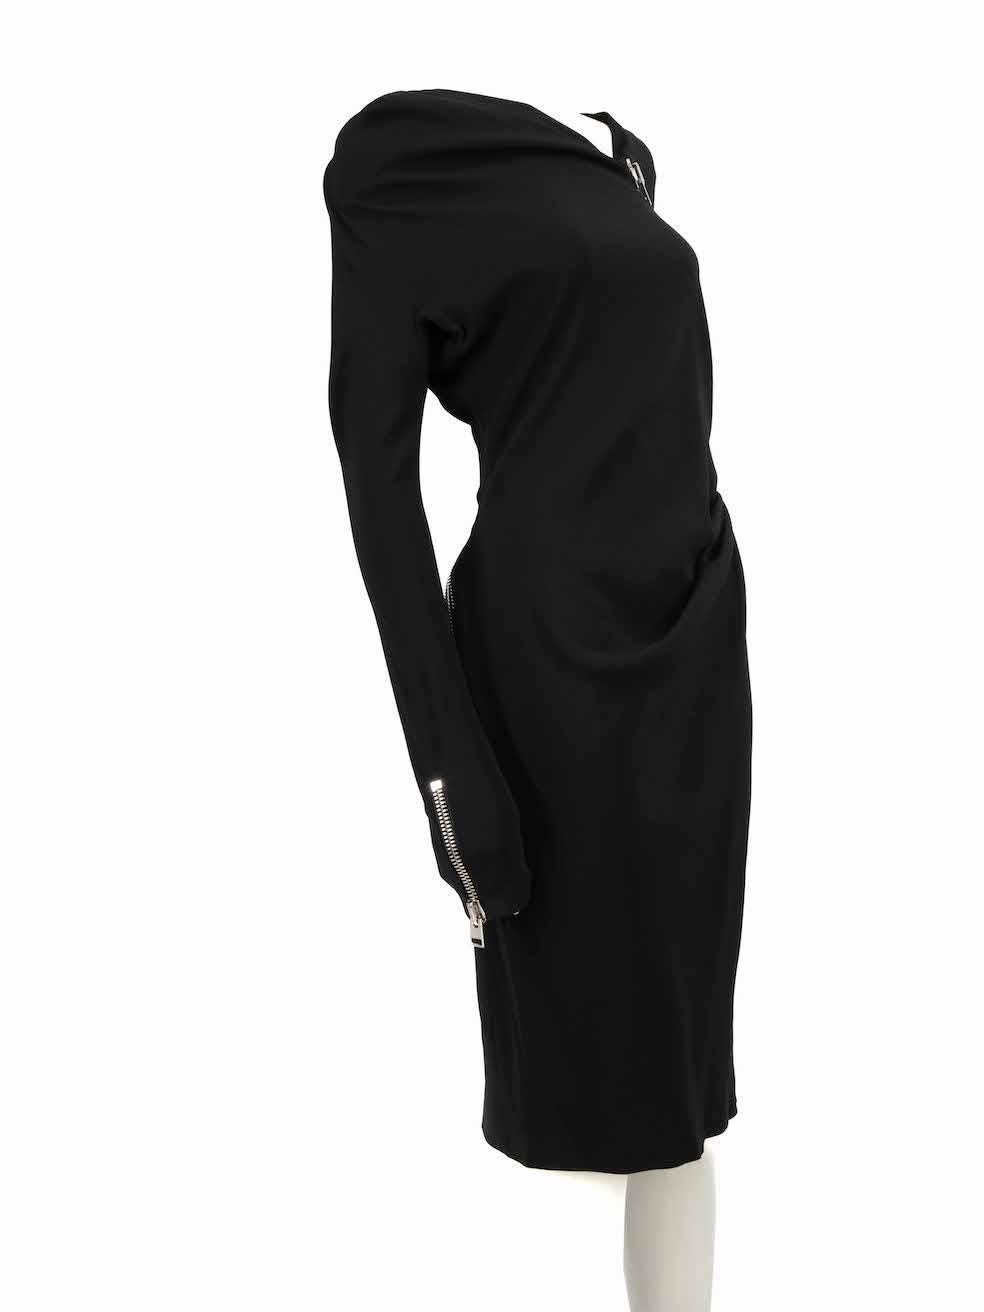 CONDITION is Very good. Minimal wear to dress is evident where one side of the snap button on zip detail is unstitched on this used Tom Ford designer resale item.
 
 
 
 Details
 
 
 Black
 
 Viscose
 
 Midi dress
 
 Wide neckline
 
 Zip detail with